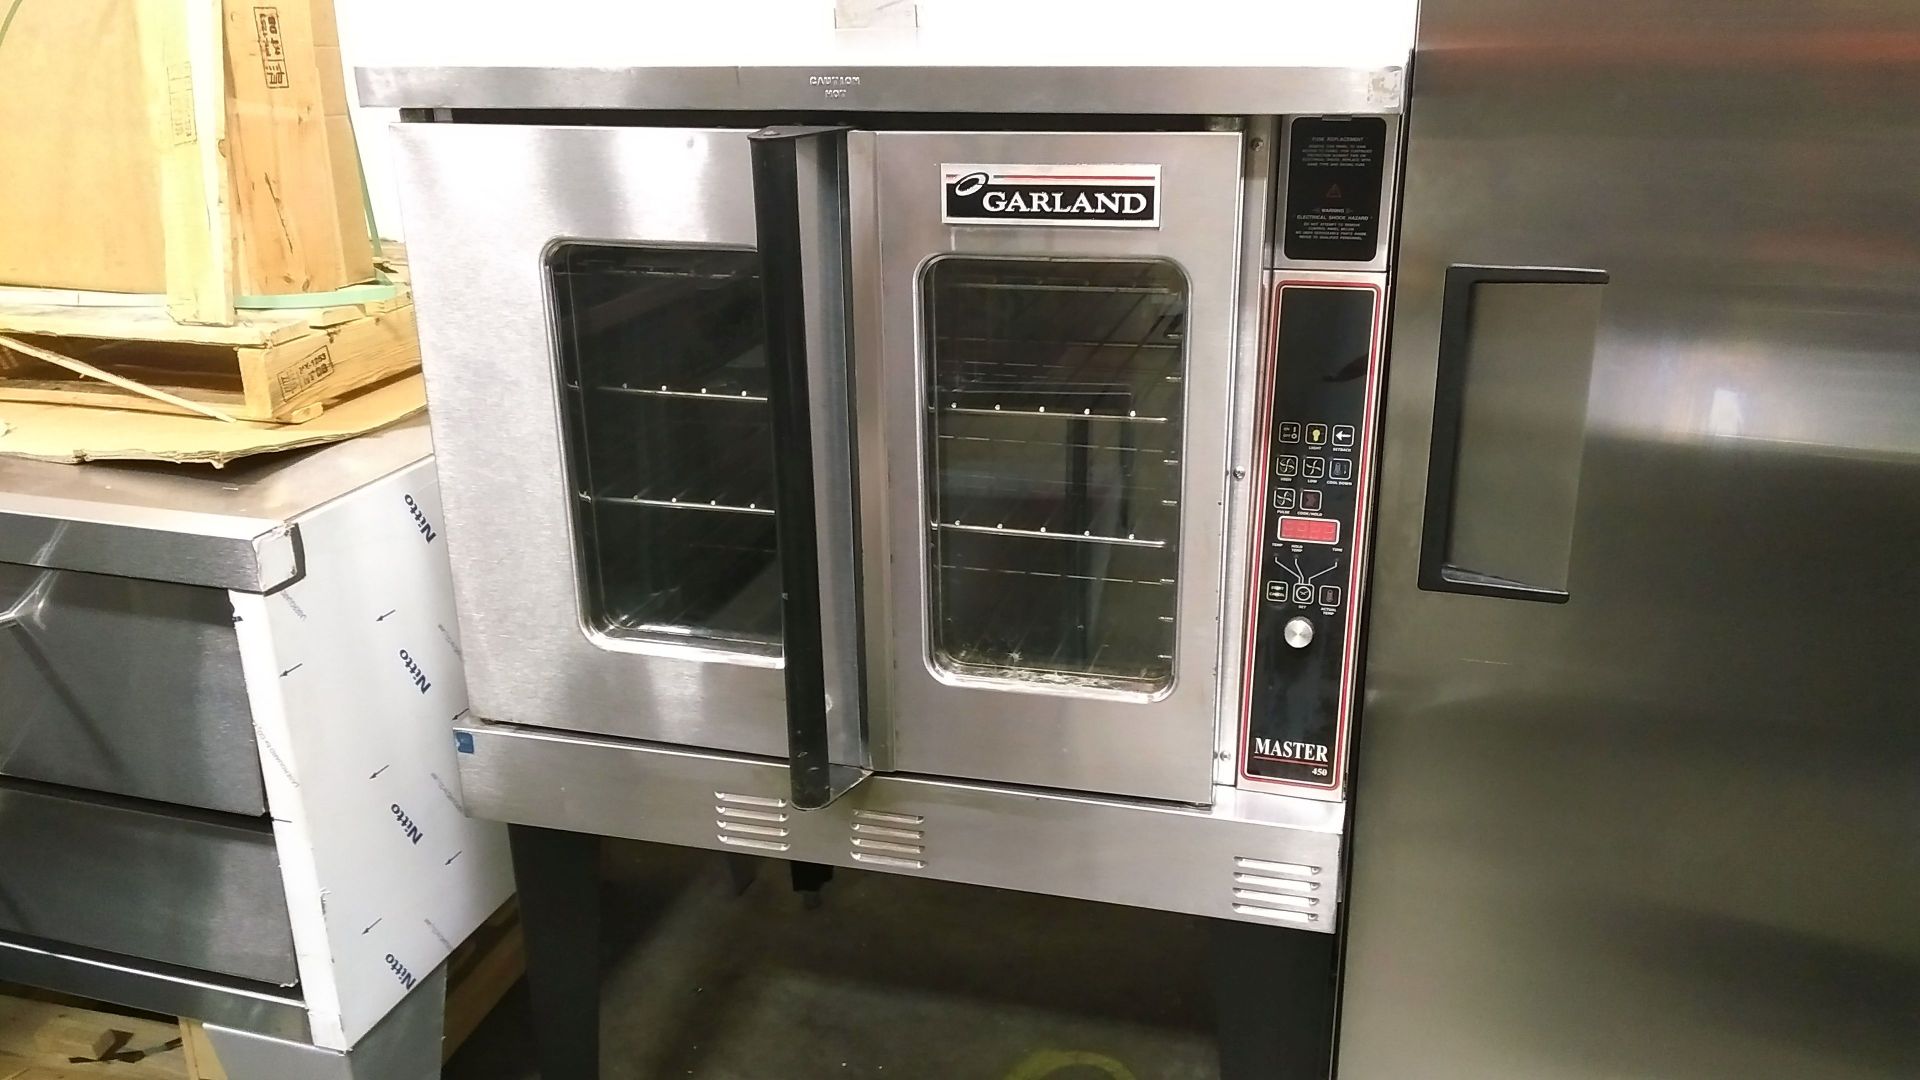 Garland Master 450 Electric Convection Oven - Image 3 of 3